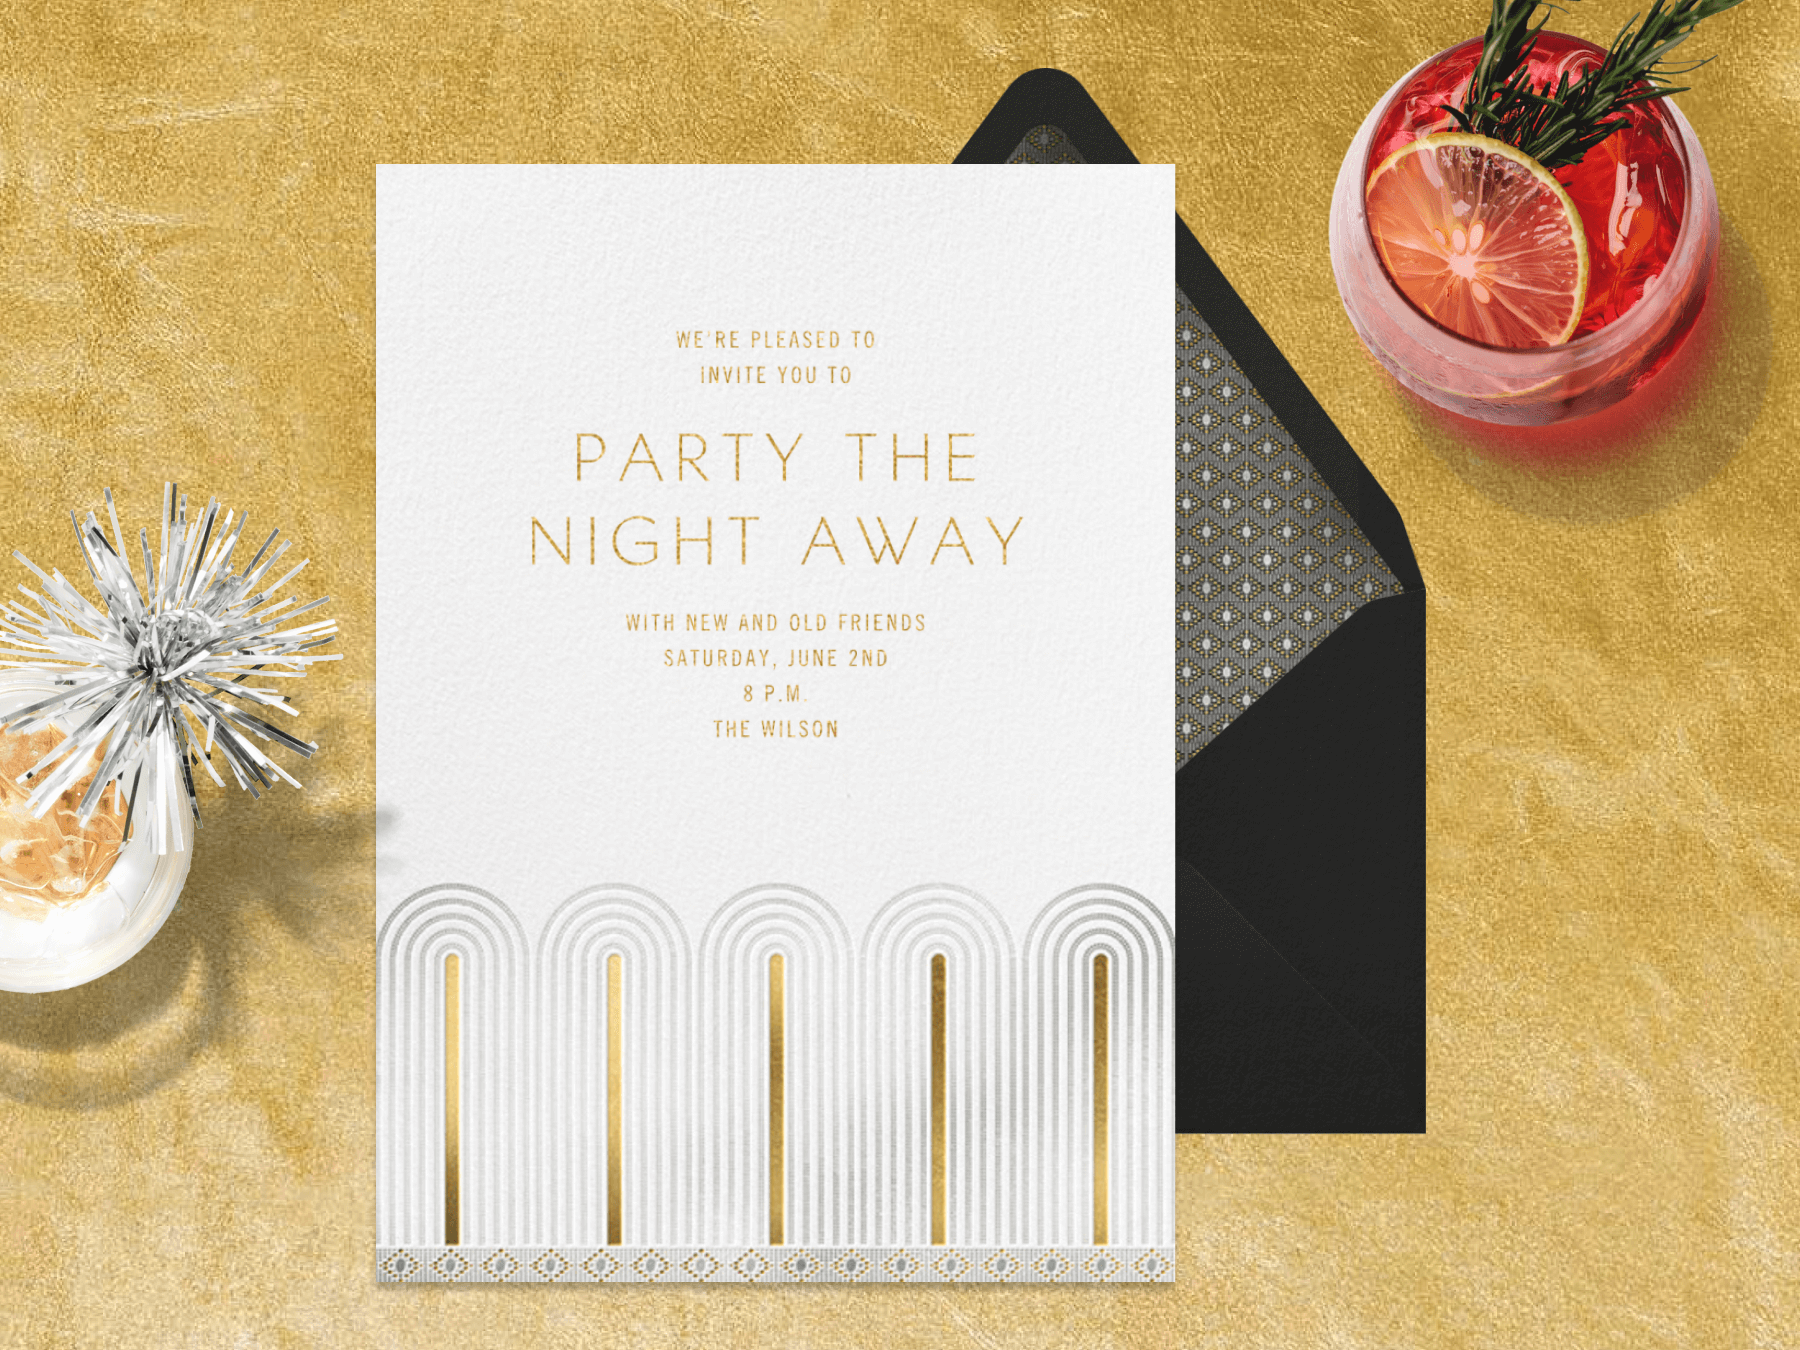 A party invitation with gold Art Deco arches on the bottom on a gold backdrop with two cocktails.